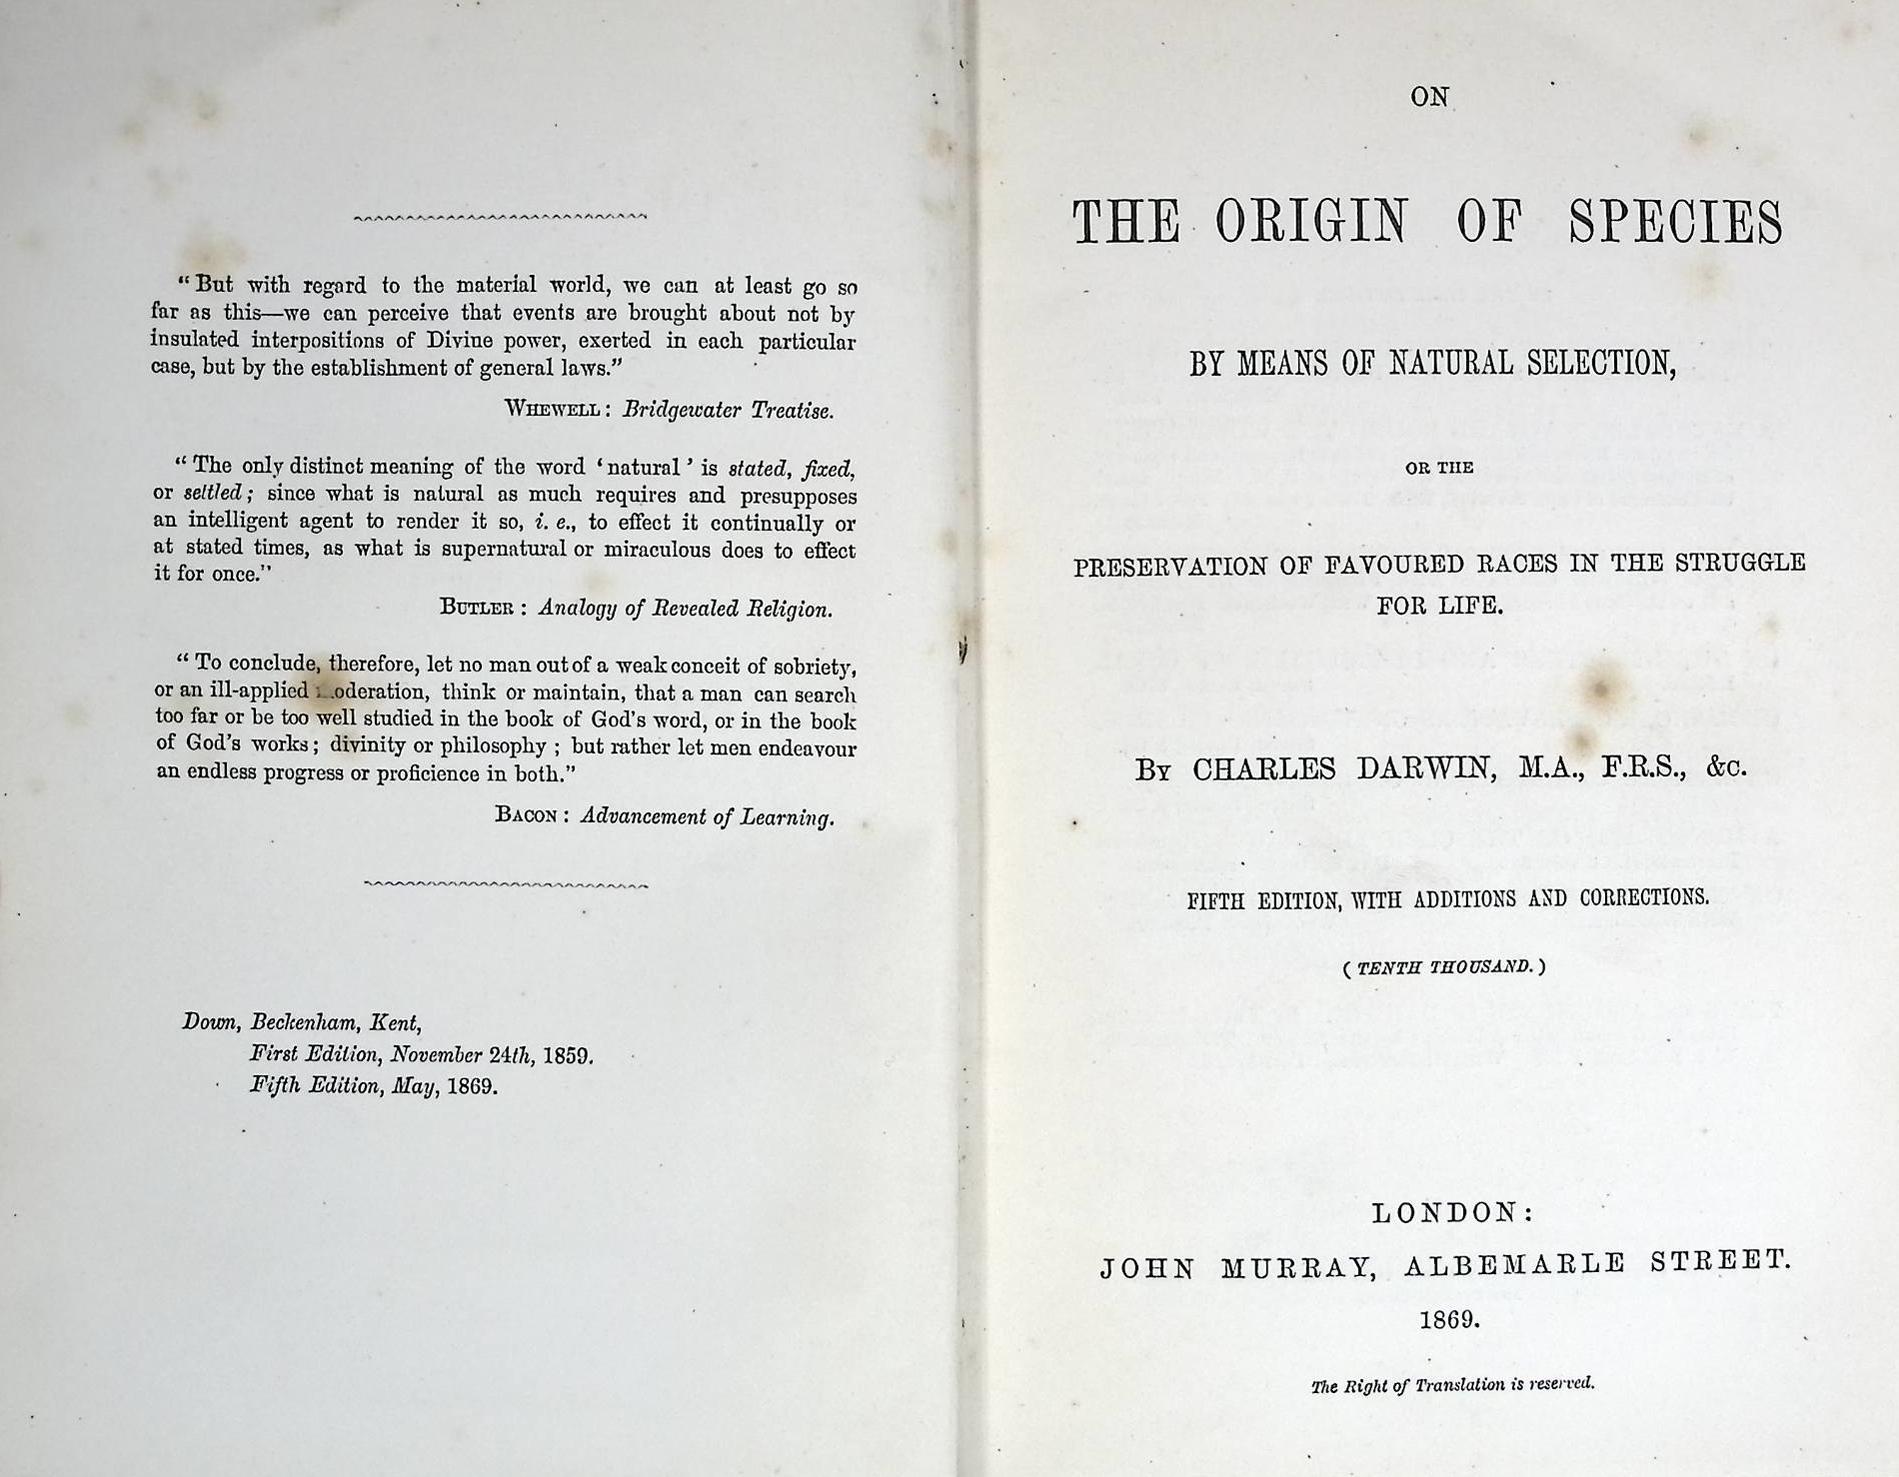 On the Origin of Species by Means of Natural Selection, or the Preservation of Favoured Races in the Struggle for Life. Murray edition. 1869.